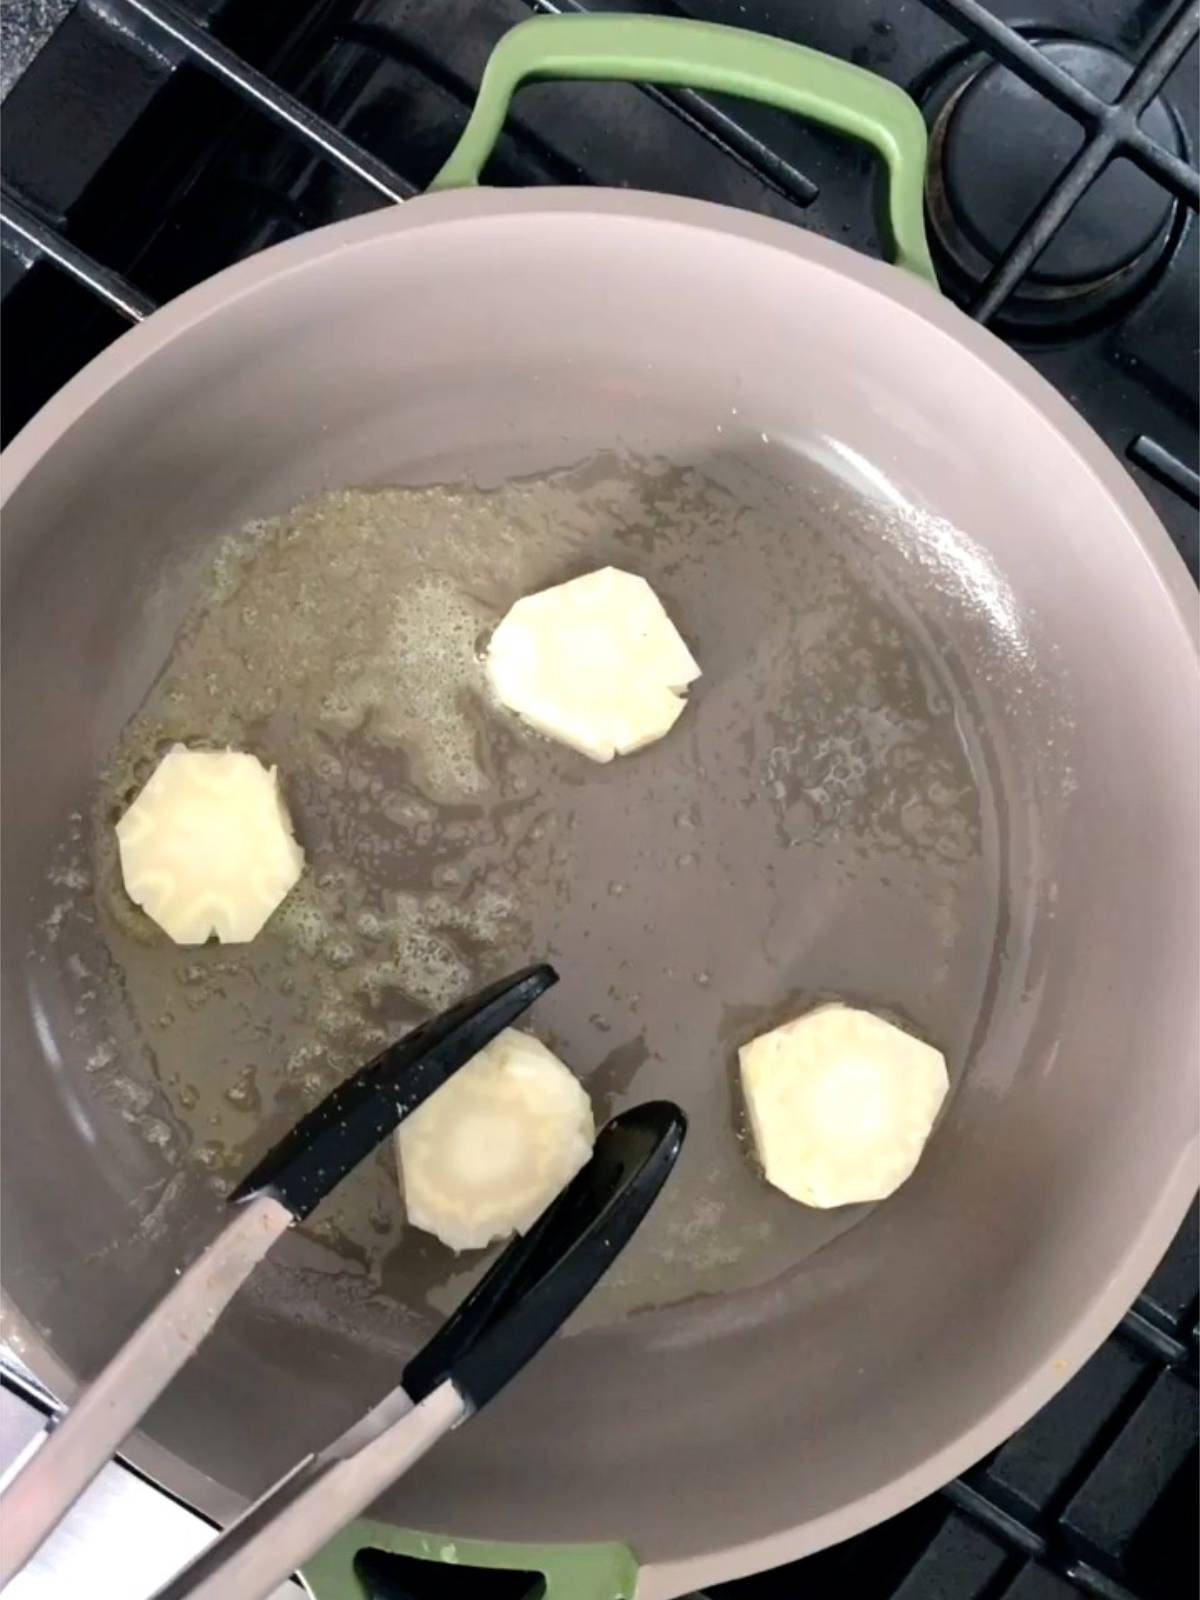 Tongs flipping a disc of cauliflower stalk in a non-stick pan with 3 other discs of cauliflower.